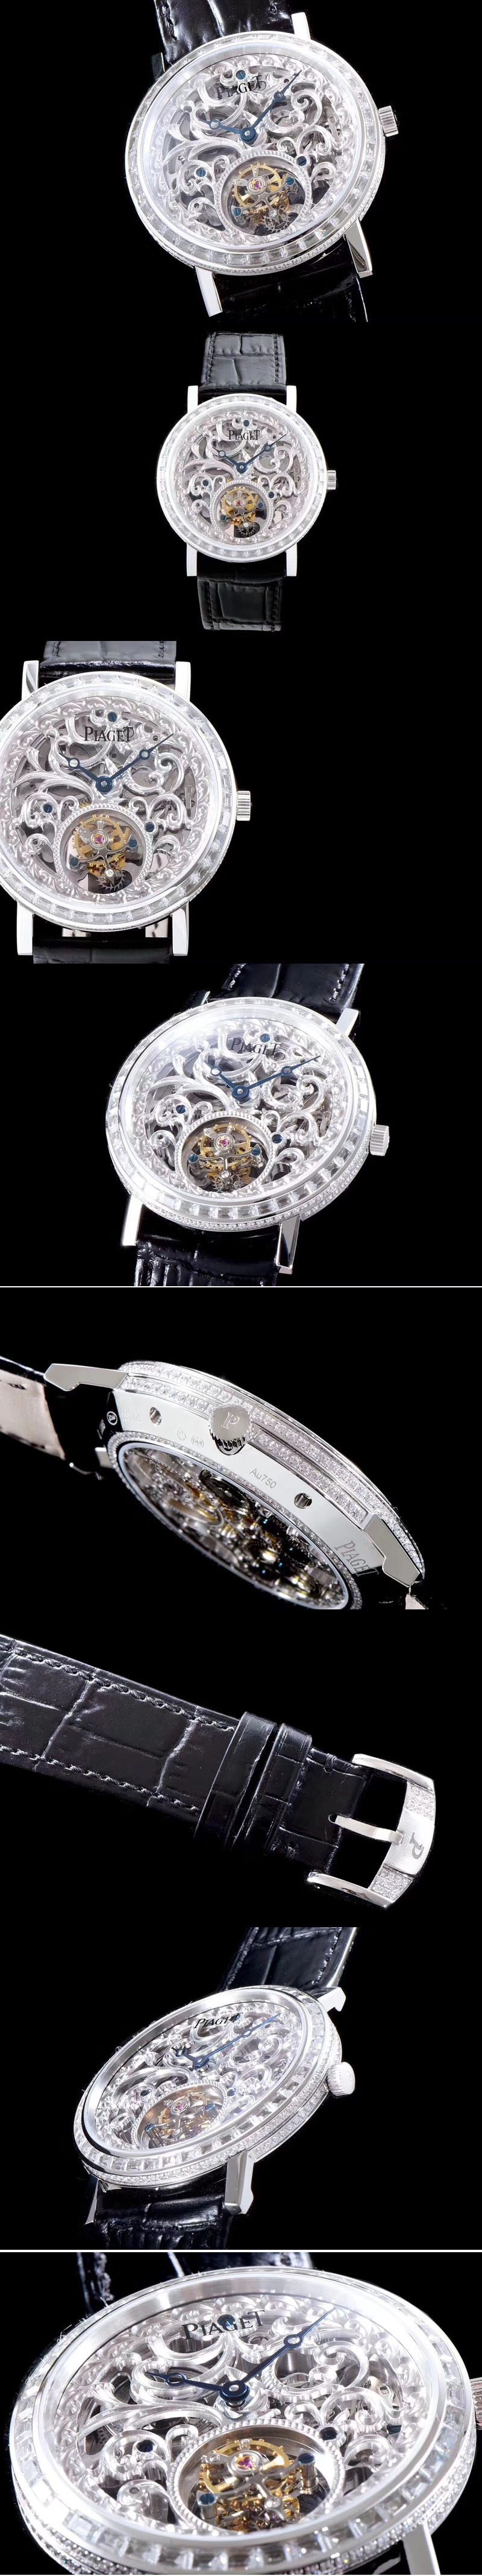 Replica Piaget Watches